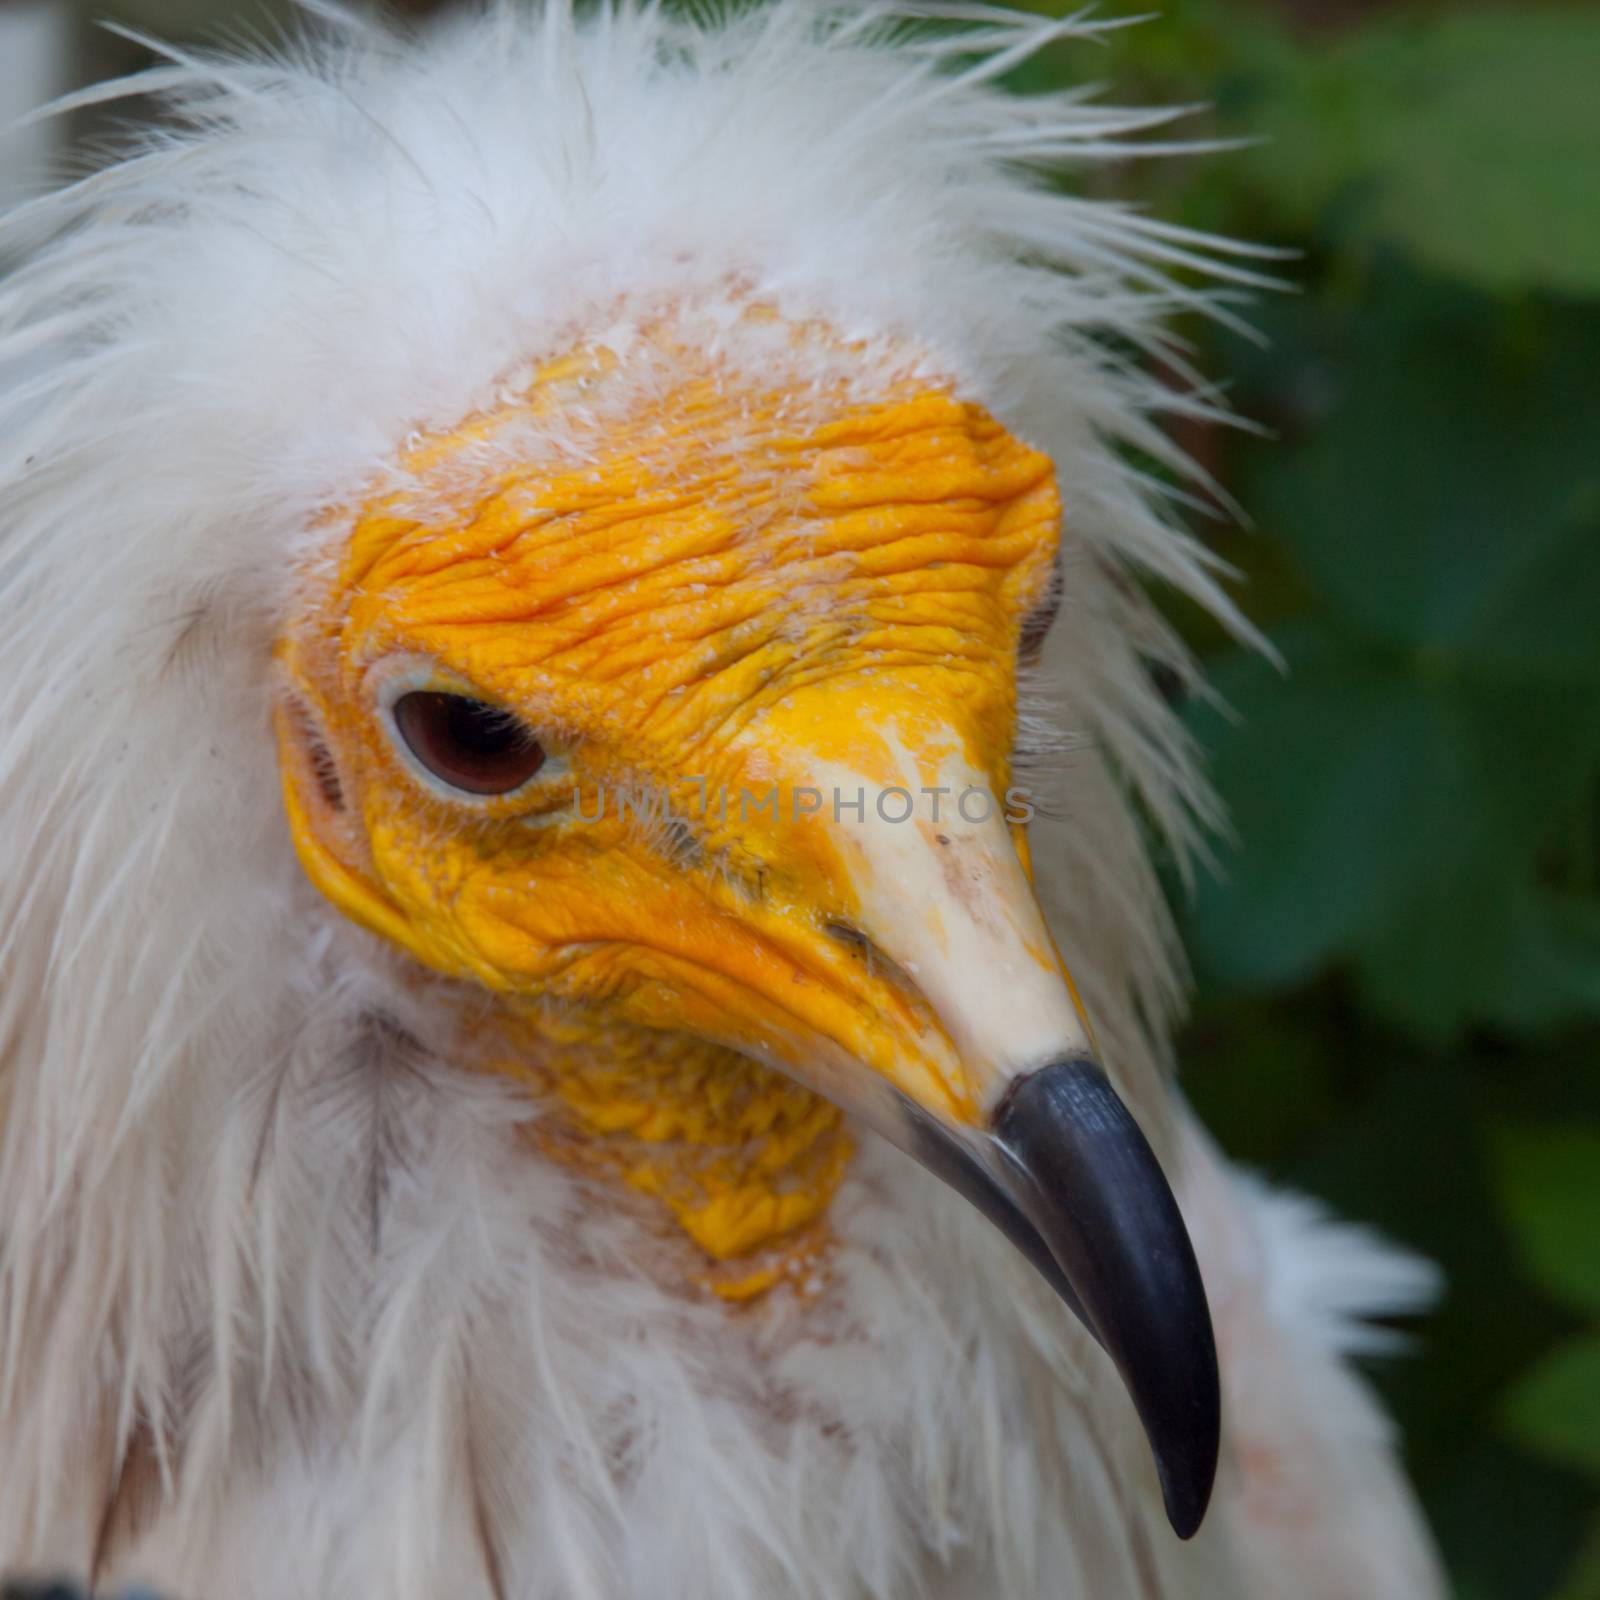 Yellow face of egyptian vulture in detail (Neophron percnopterus)